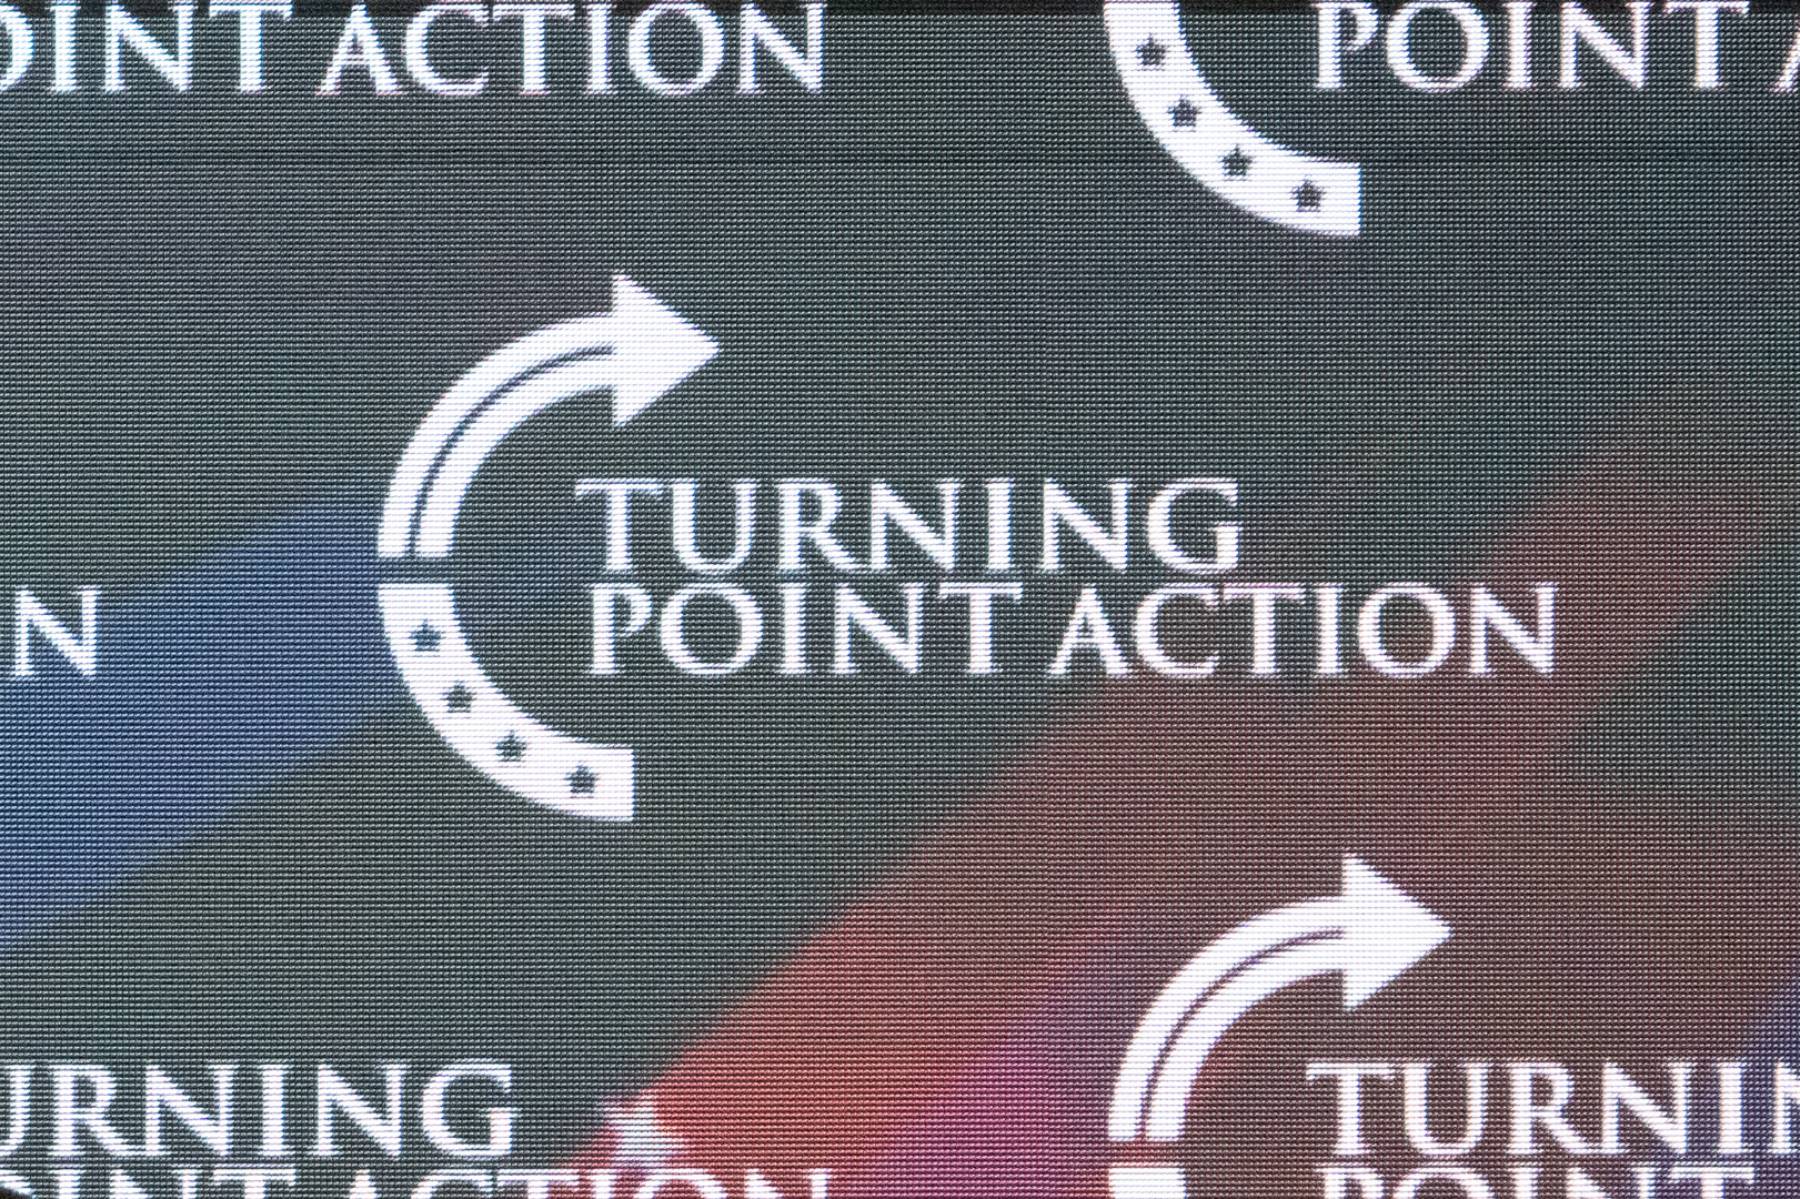 Turning Point Action Official Resigns After Election Fraud Allegation